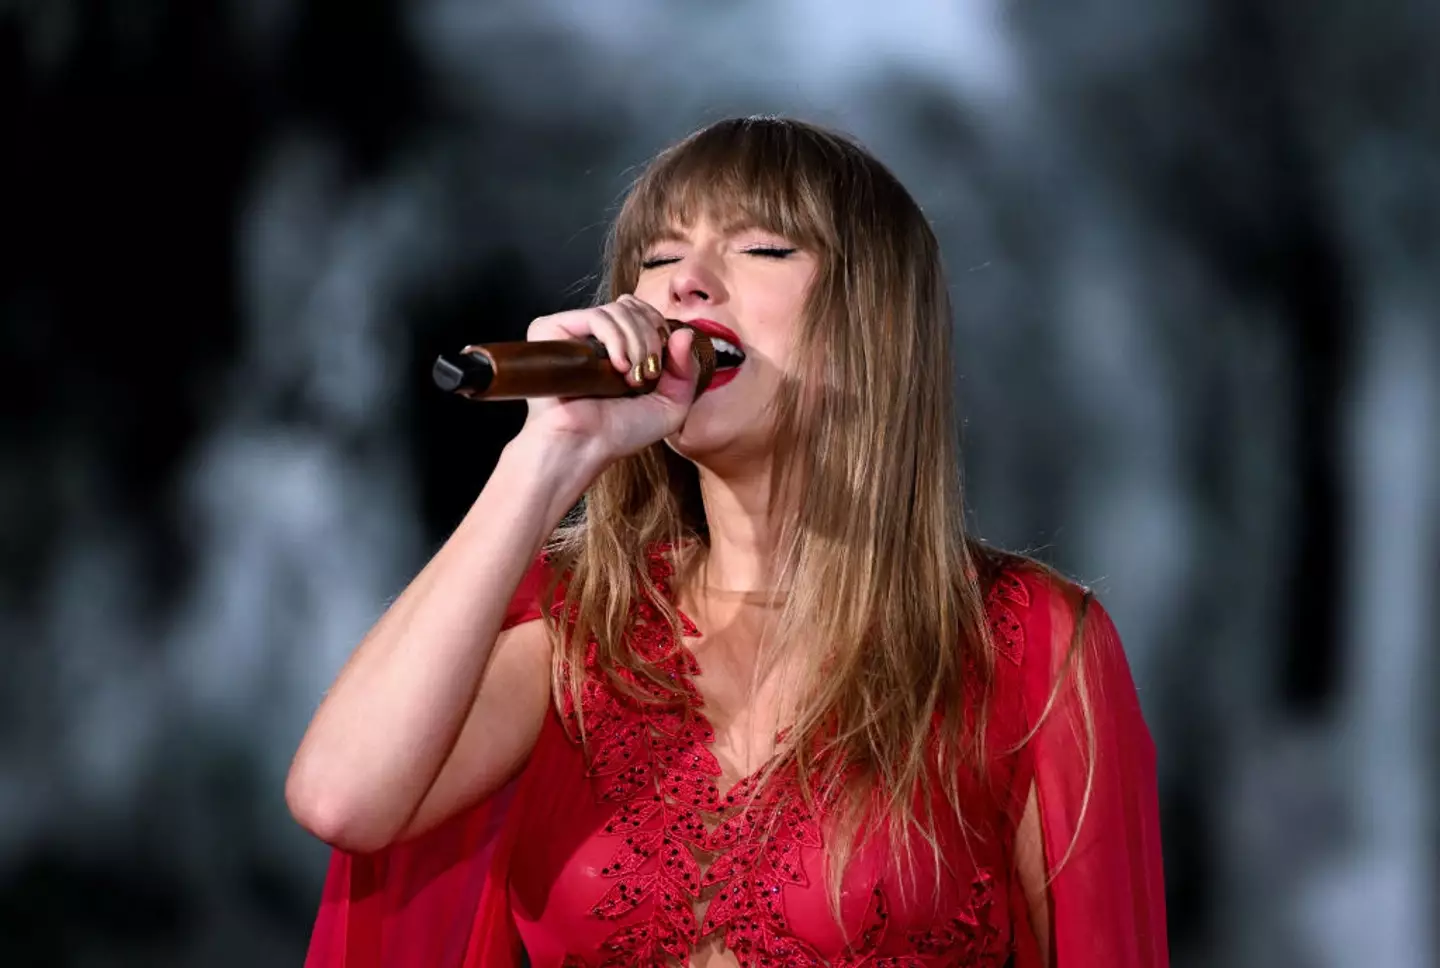 The singer's heavy schedule doesn't seem to be holding her back. (Shirlaine Forrest/TAS24/Getty Images for TAS Rights Management)